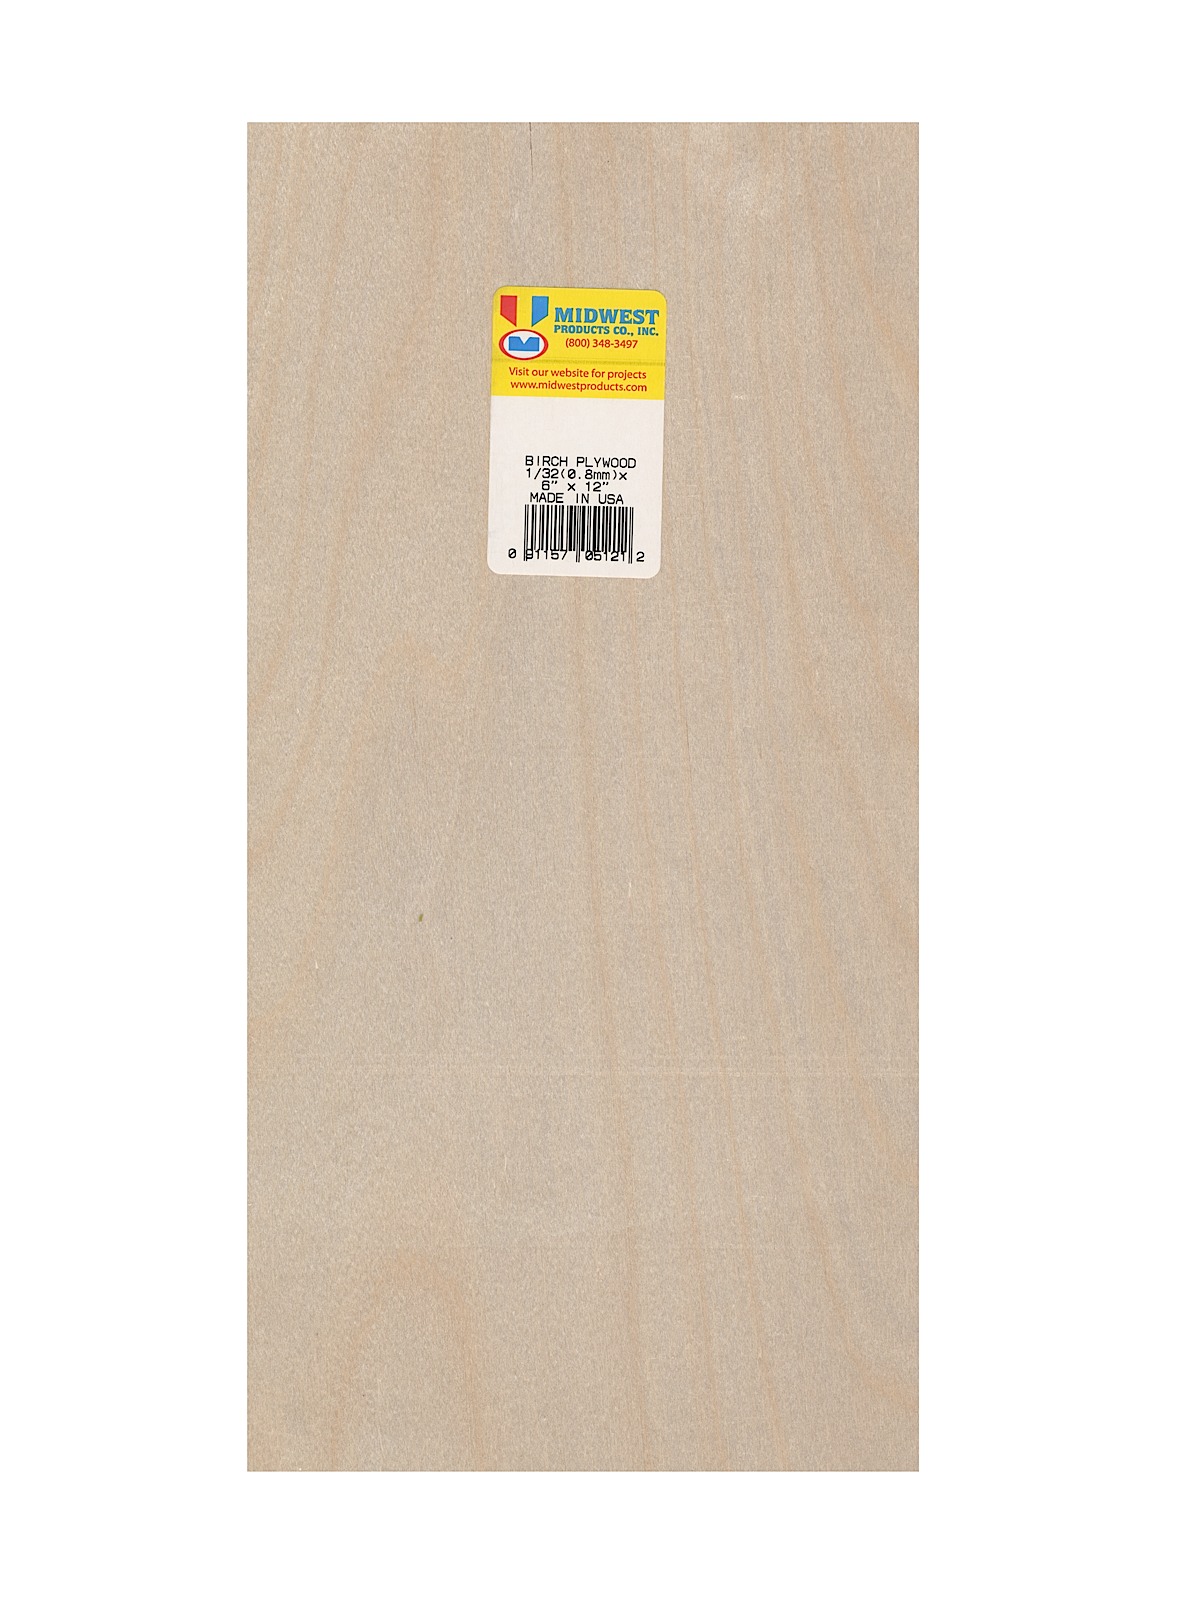 Thin Birch Plywood Aircraft Grade 1 32 In. 6 In. X 12 In.